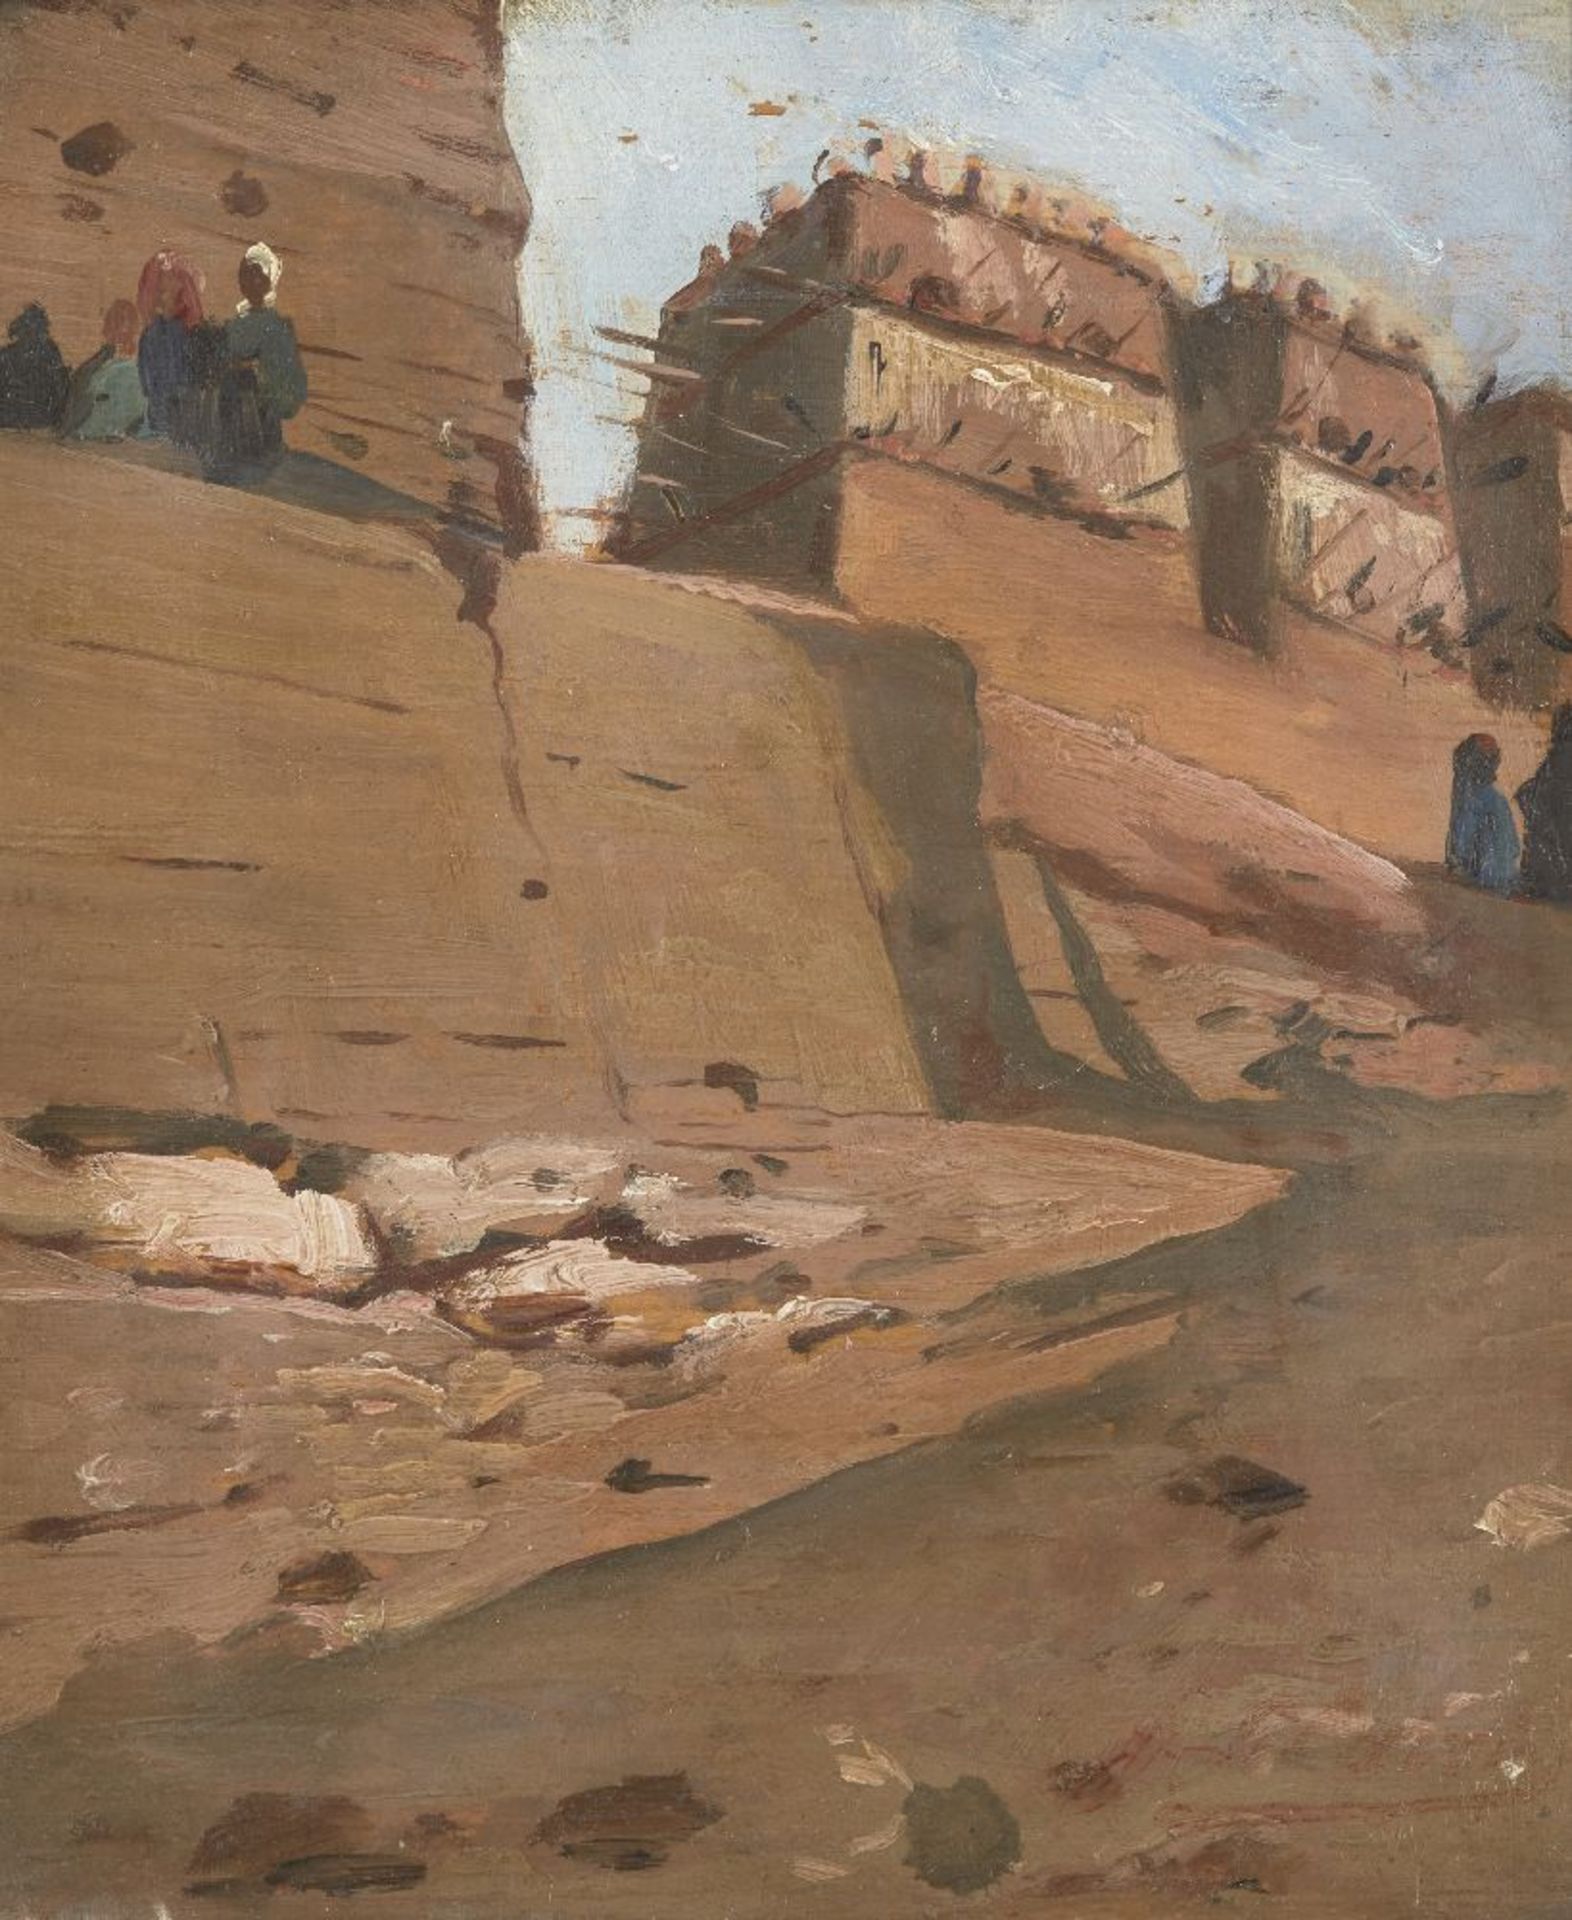 Georges Jules Victor Clairin, French 1843-1919- Abydos, Egypte; oil on panel, signed, inscribed